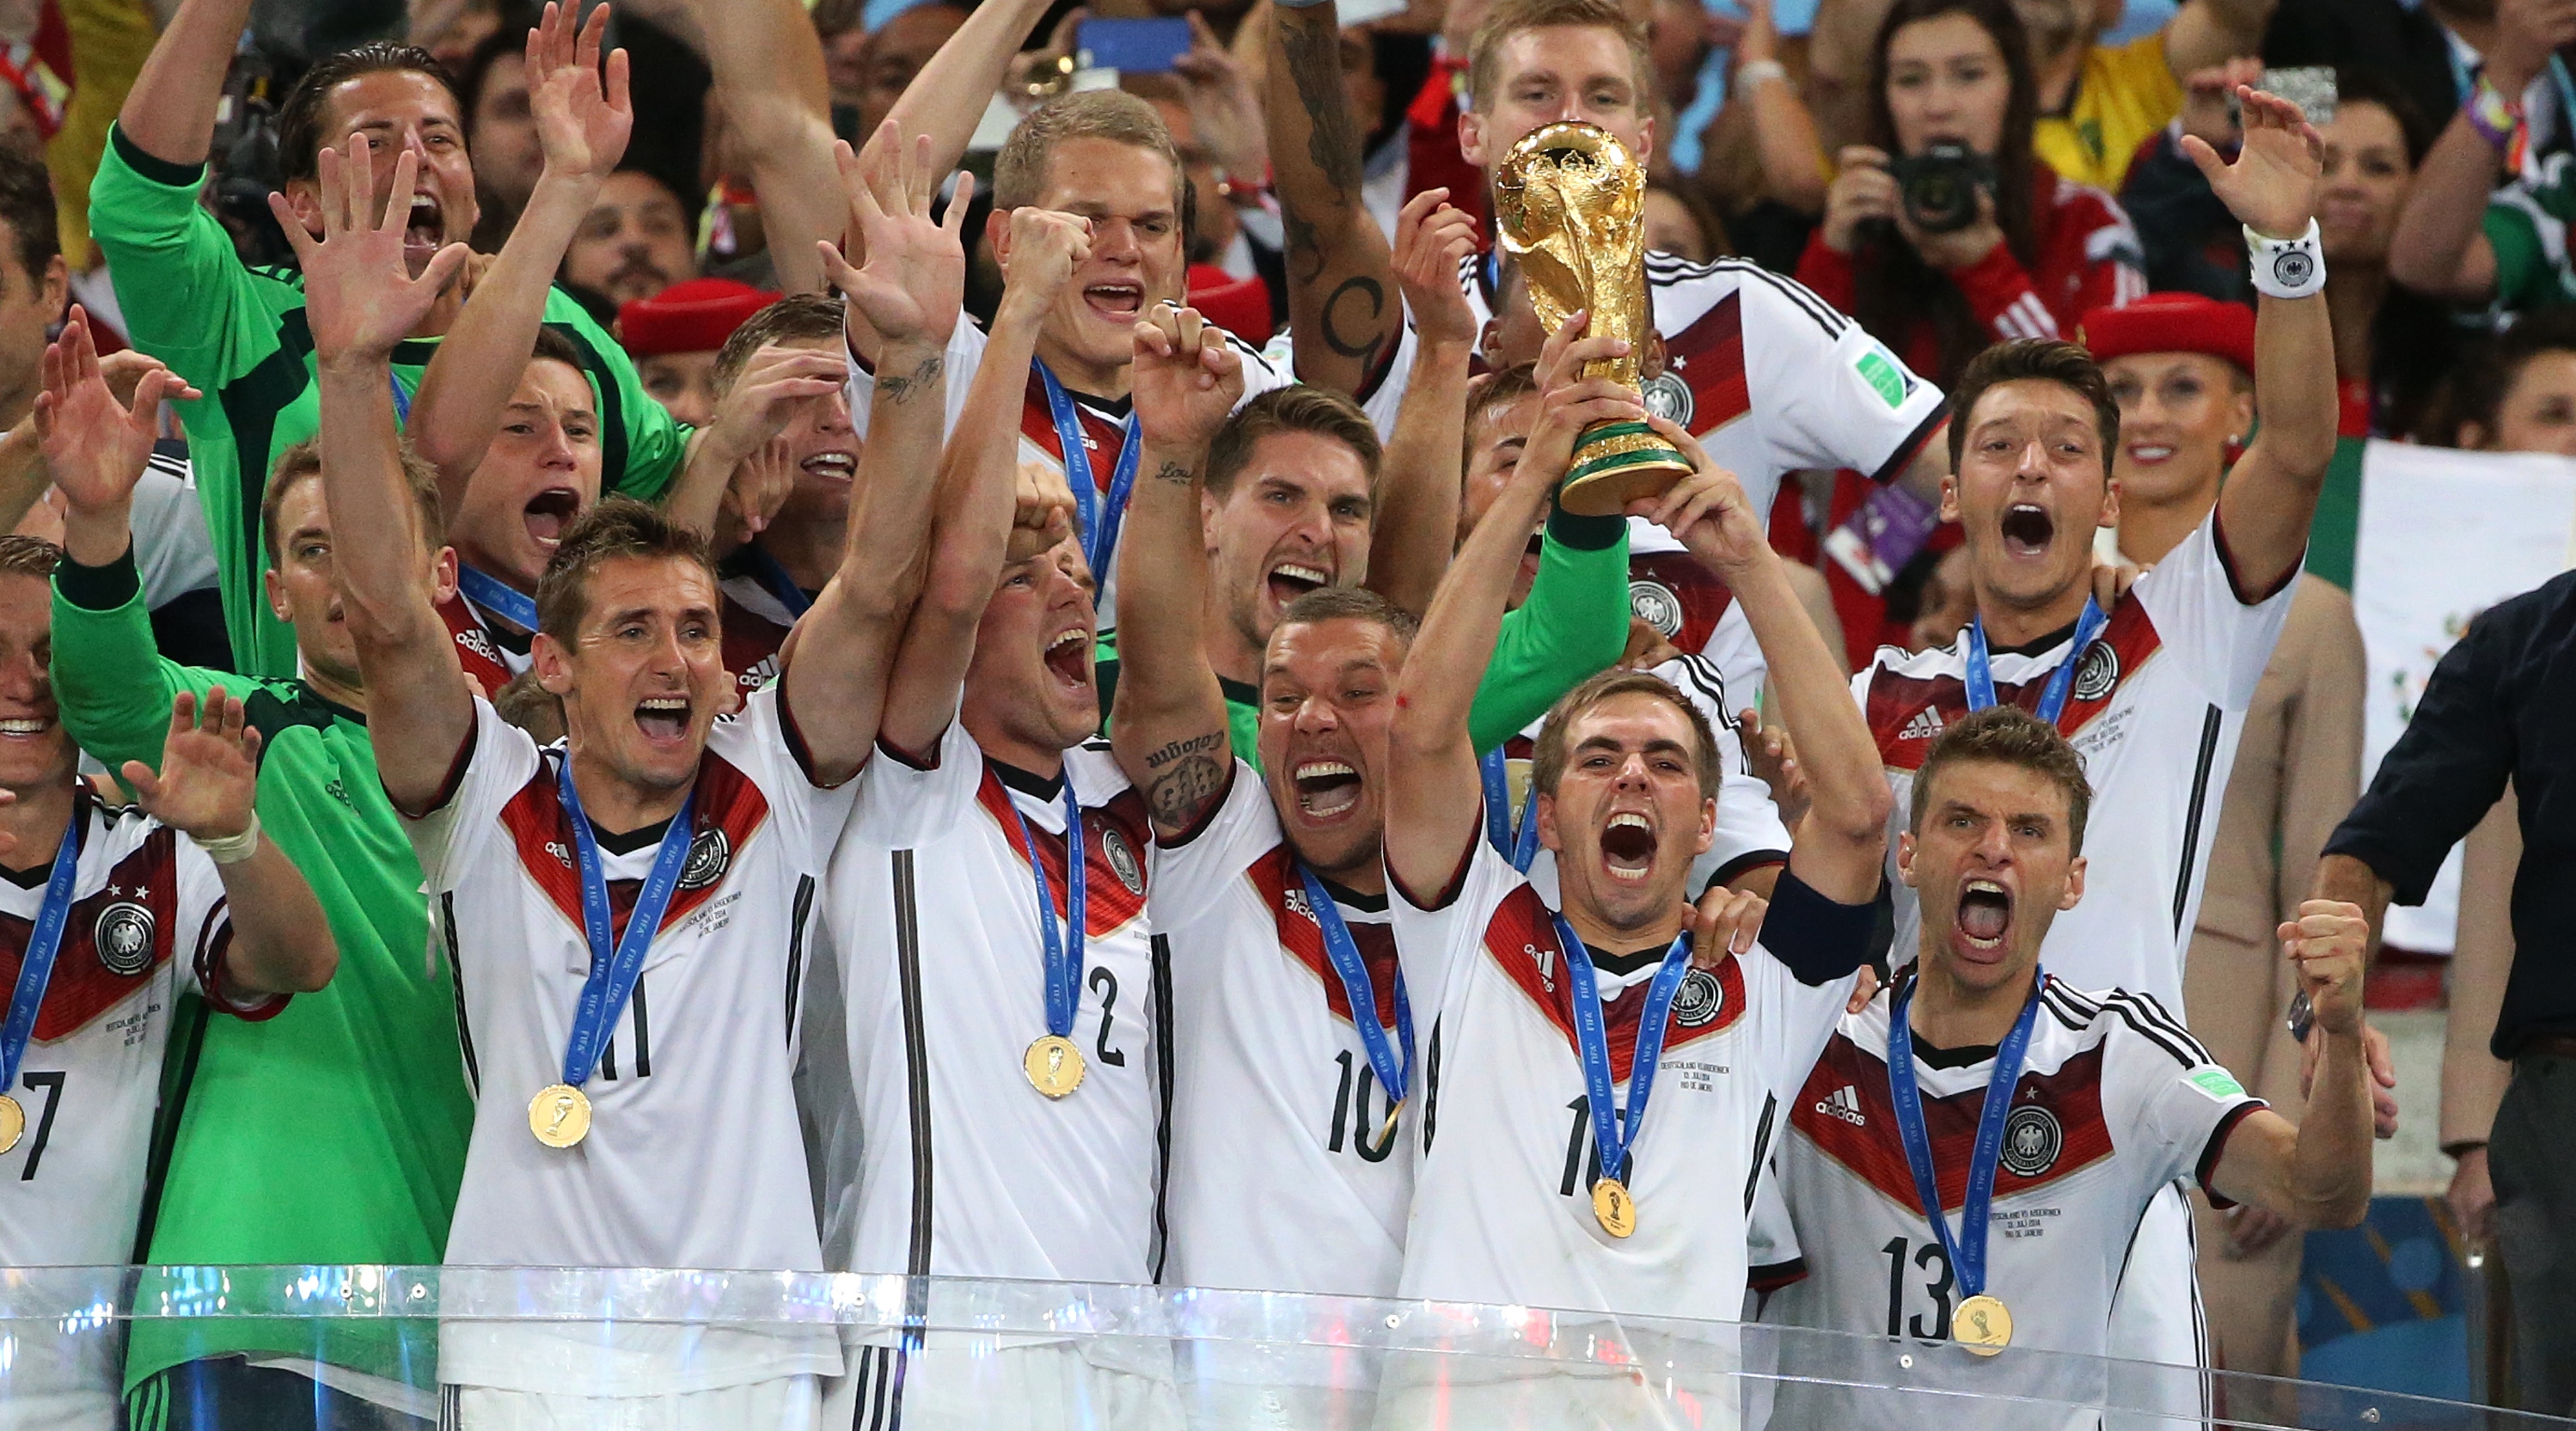 Philipp Lahm, captain of Germany holds the trophy and celebrate the victory with his teammates during the trophy presentation after the 2014 FIFA World Cup Brazil Final match between Germany and Argentina at Estadio Maracana on July 13, 2014 in Rio de Janeiro, Brazil.